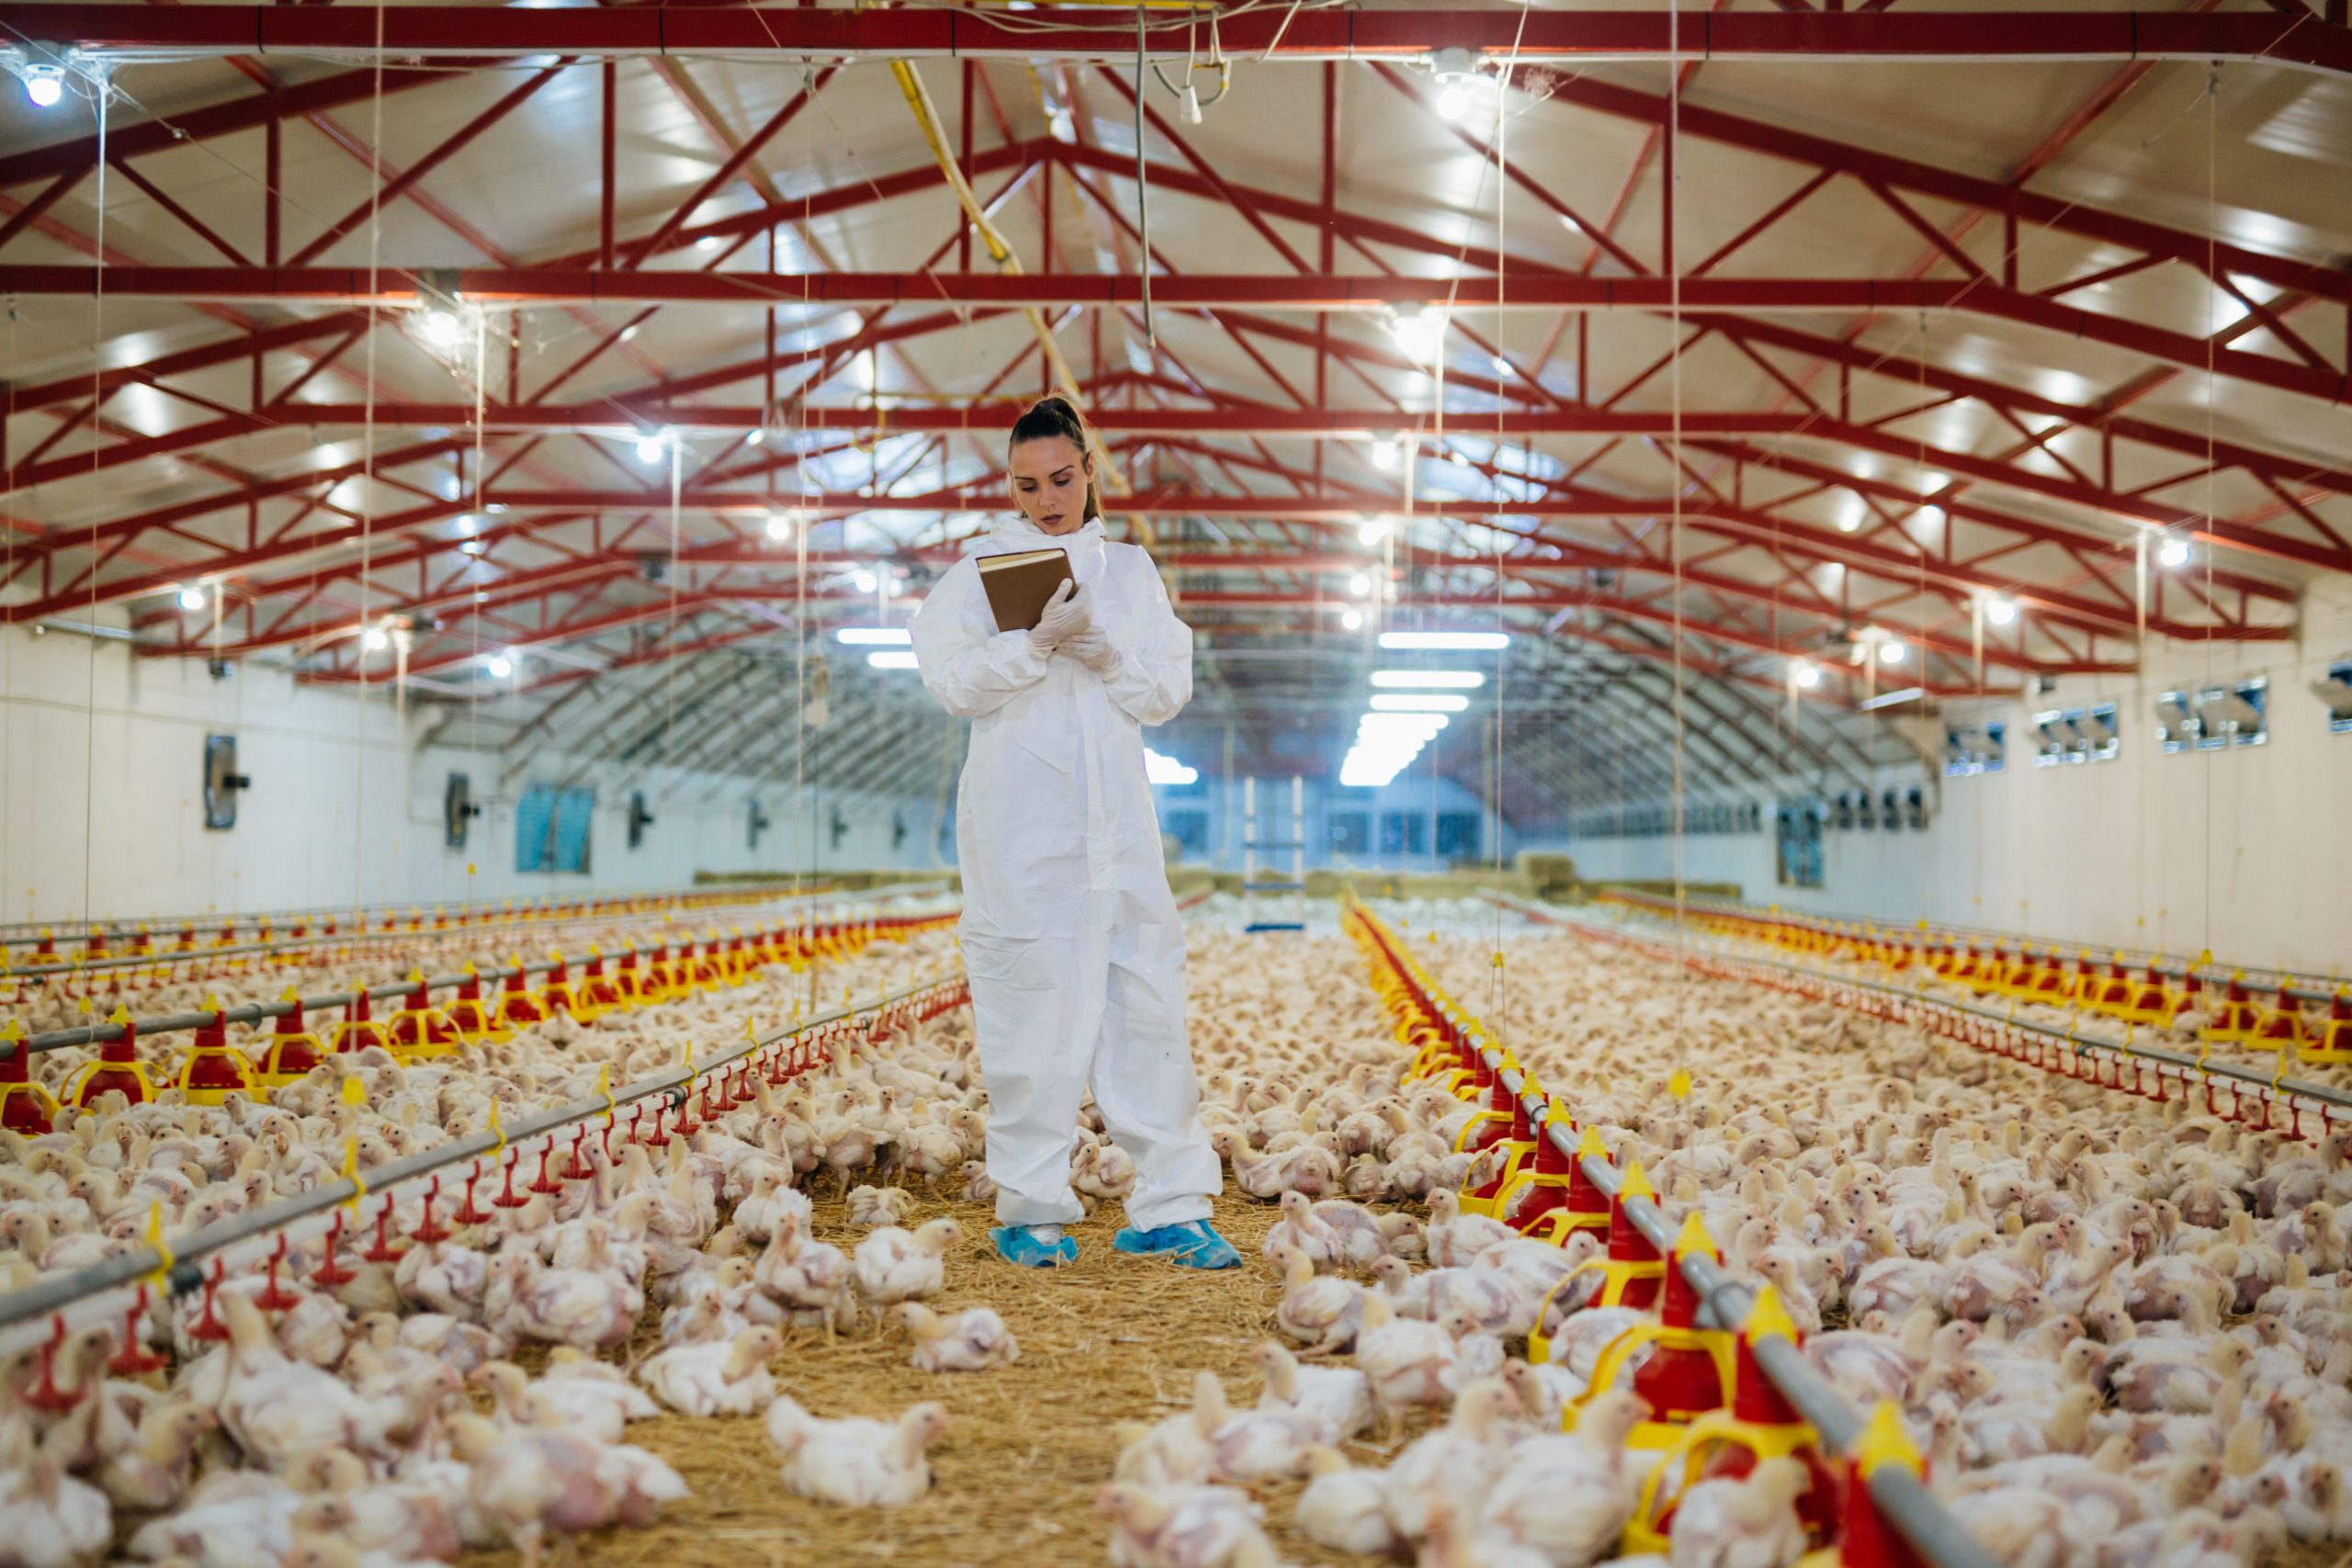 Poultry feed efficiency research has implications for human health